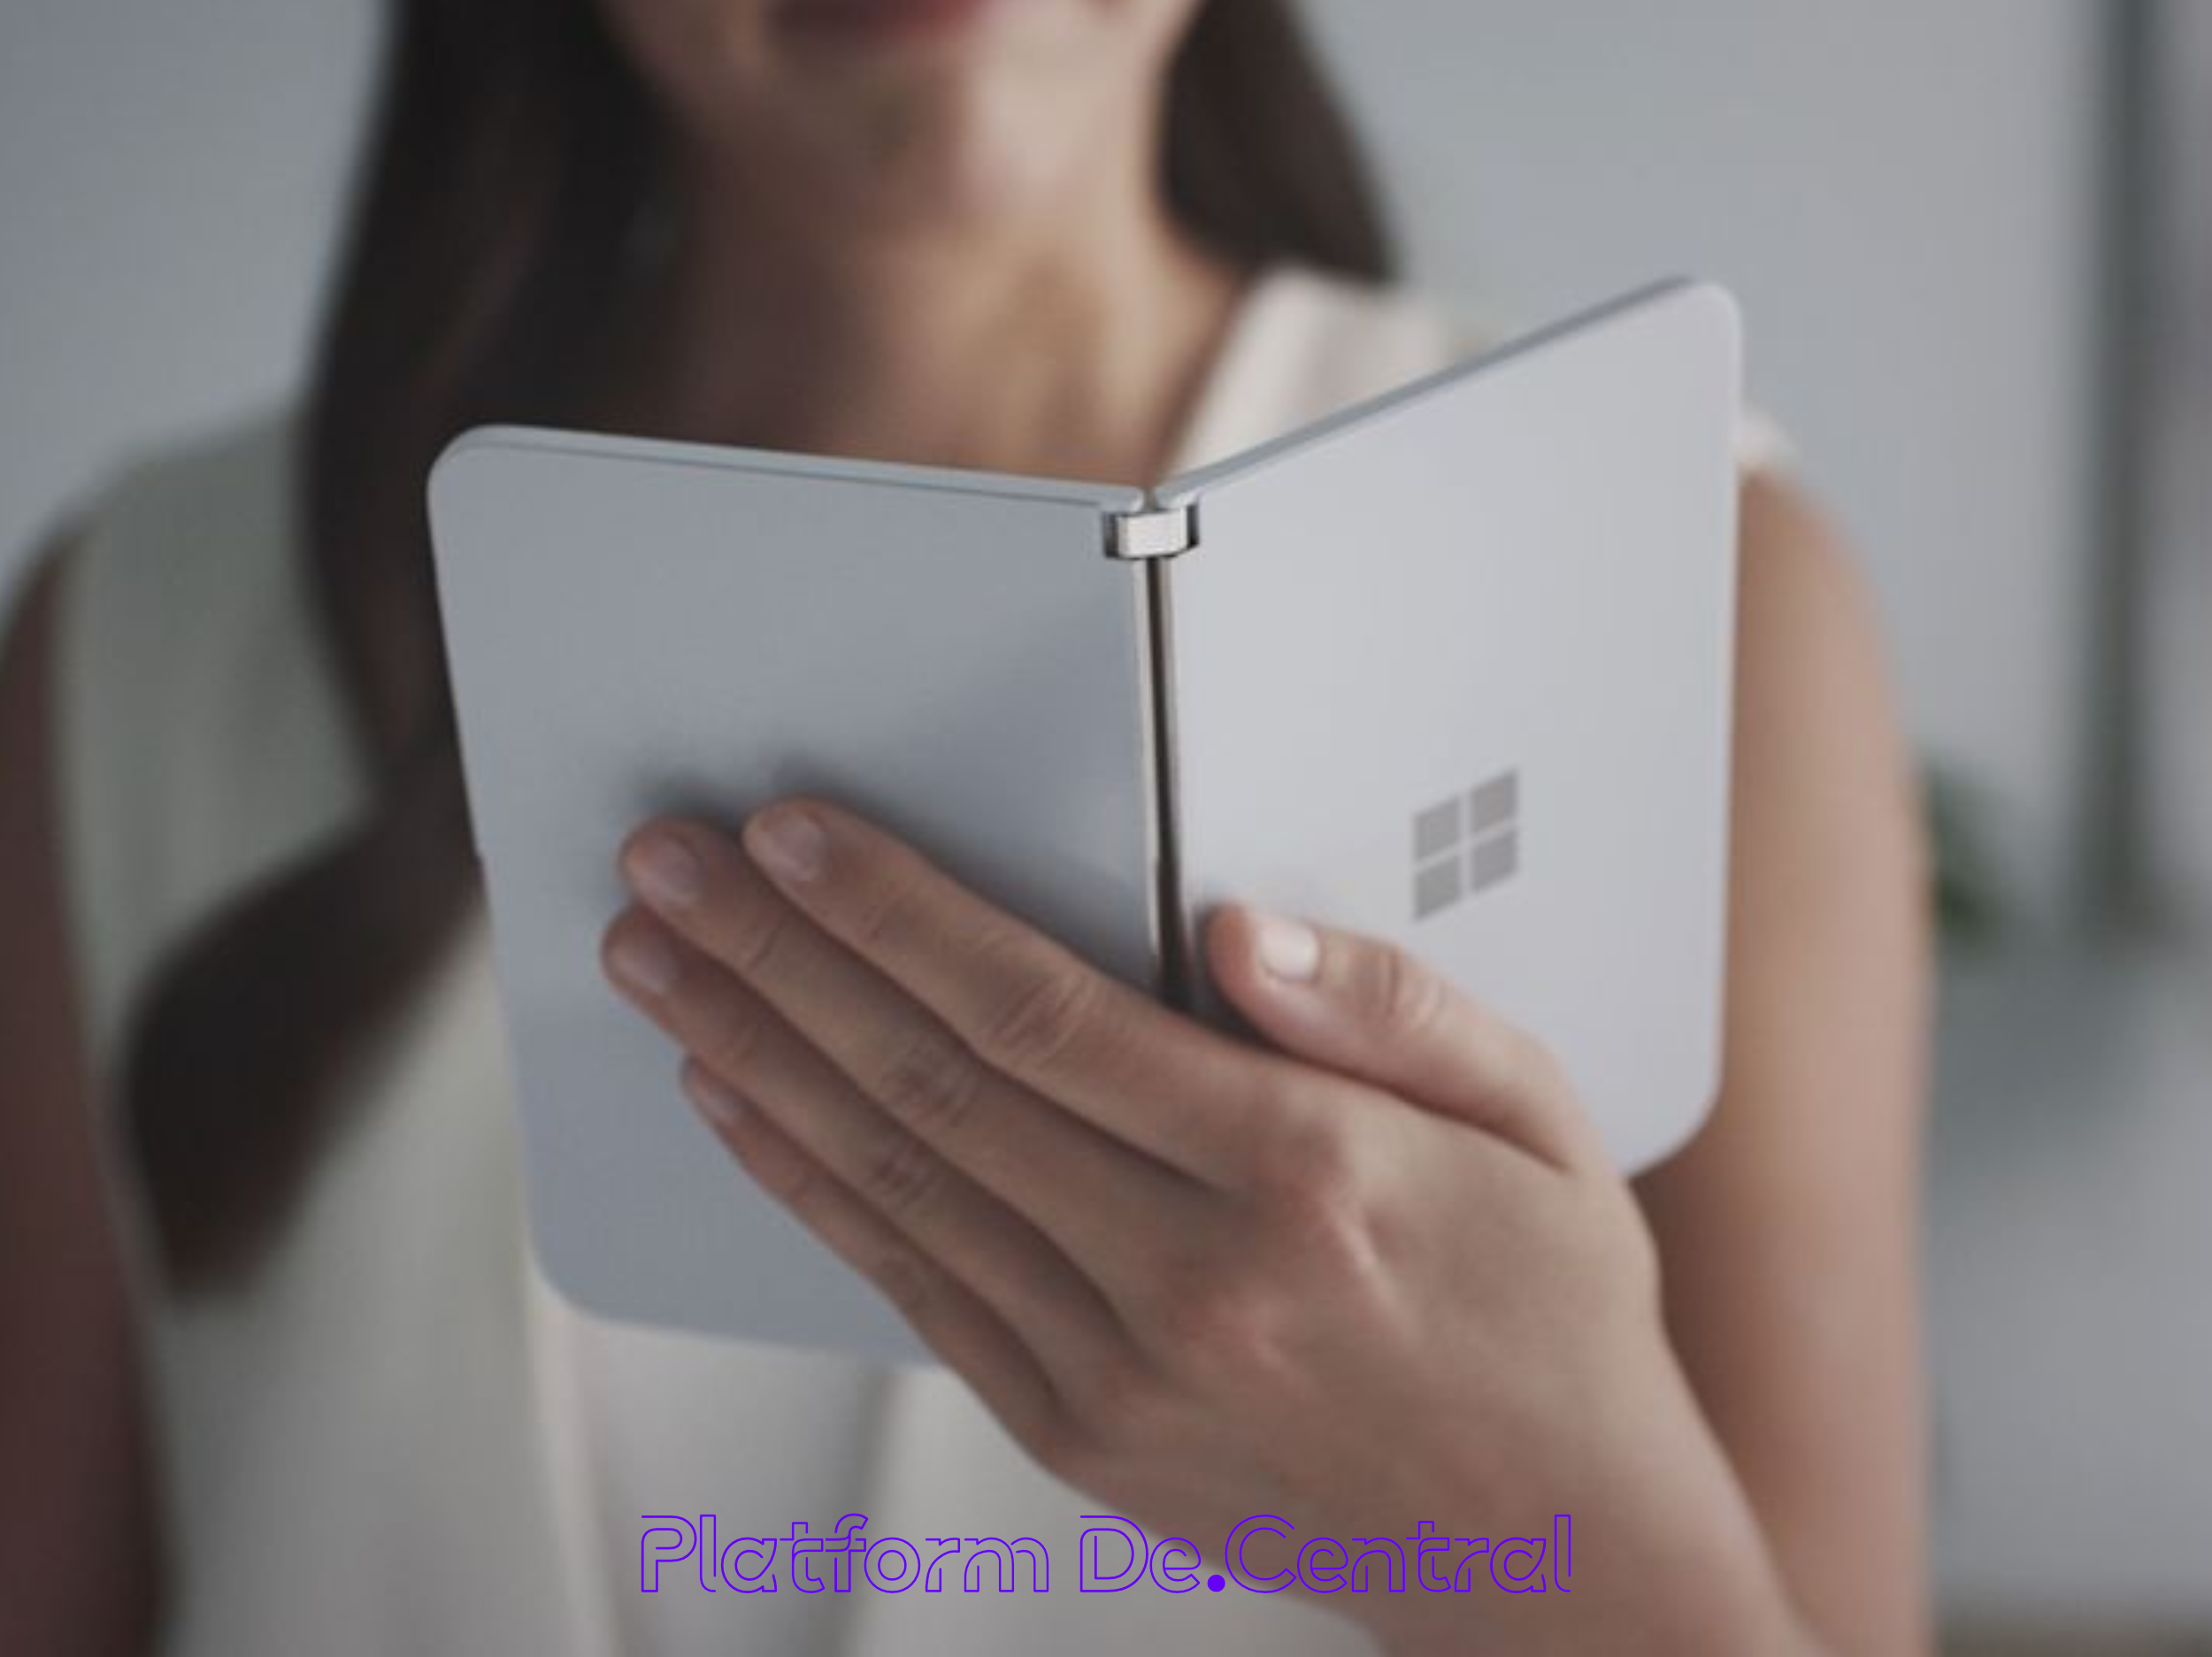 Surface Duo coming sooner than originally thought